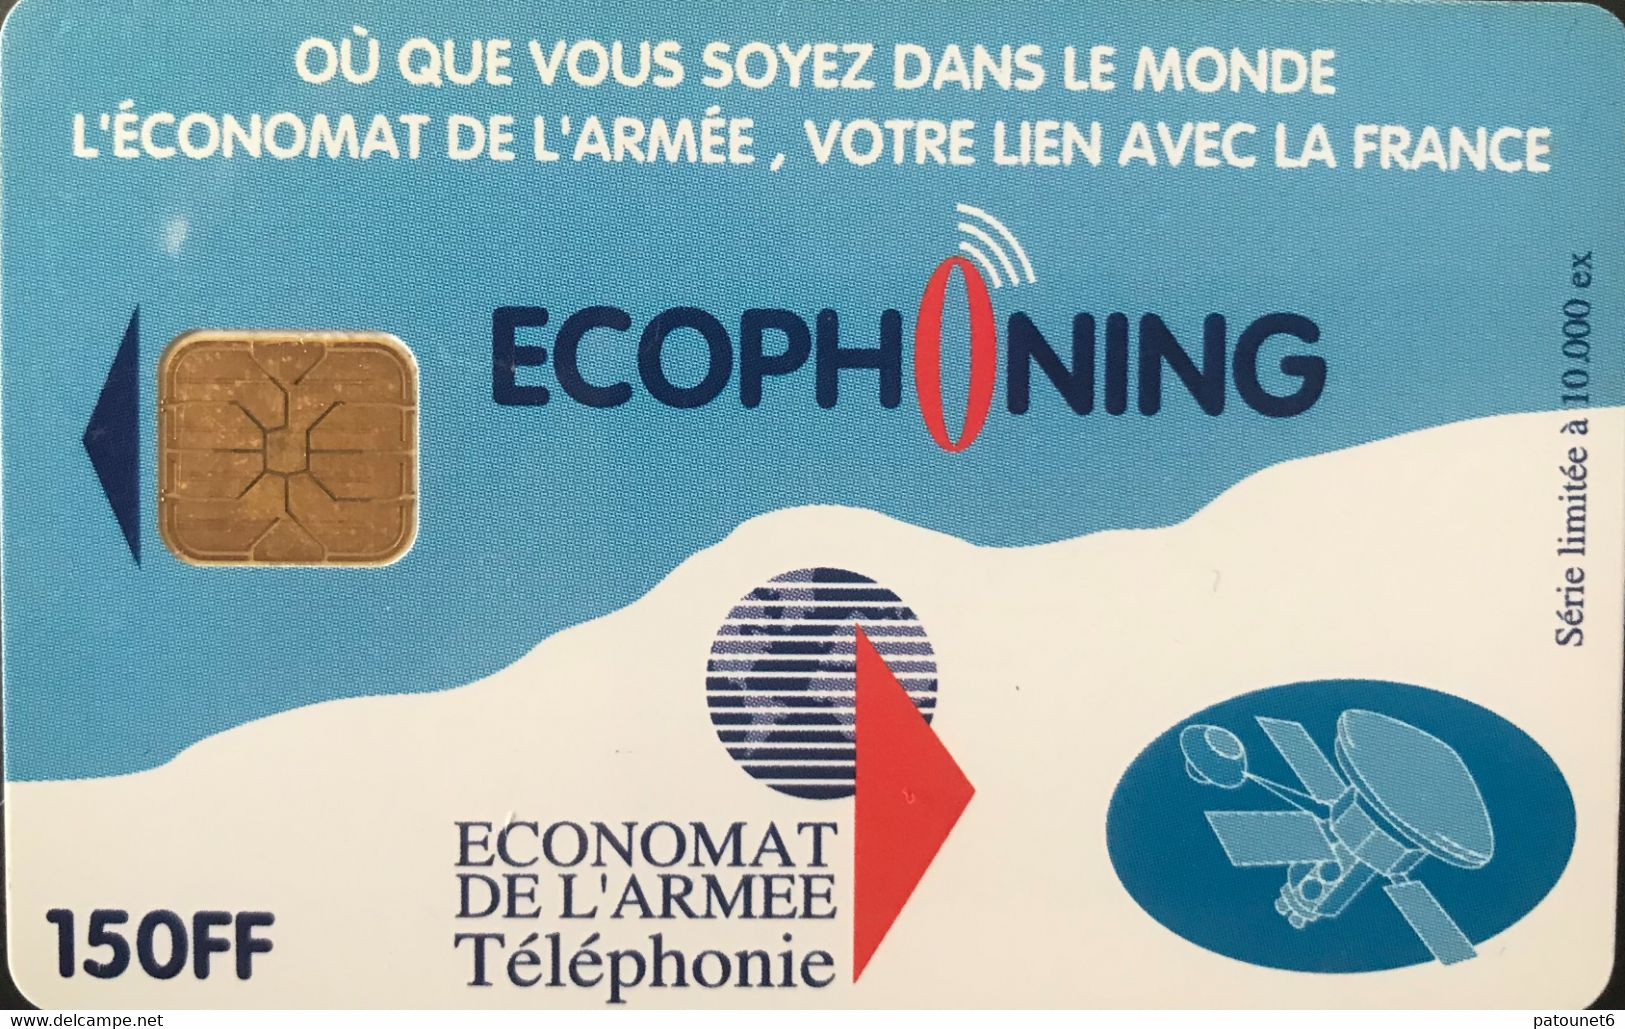 FRANCE  -  ARMEE  -  Phonecard  -  ECOPHONING  -  Satellite  -  Marron Clair  -  150 FF - Military Phonecards